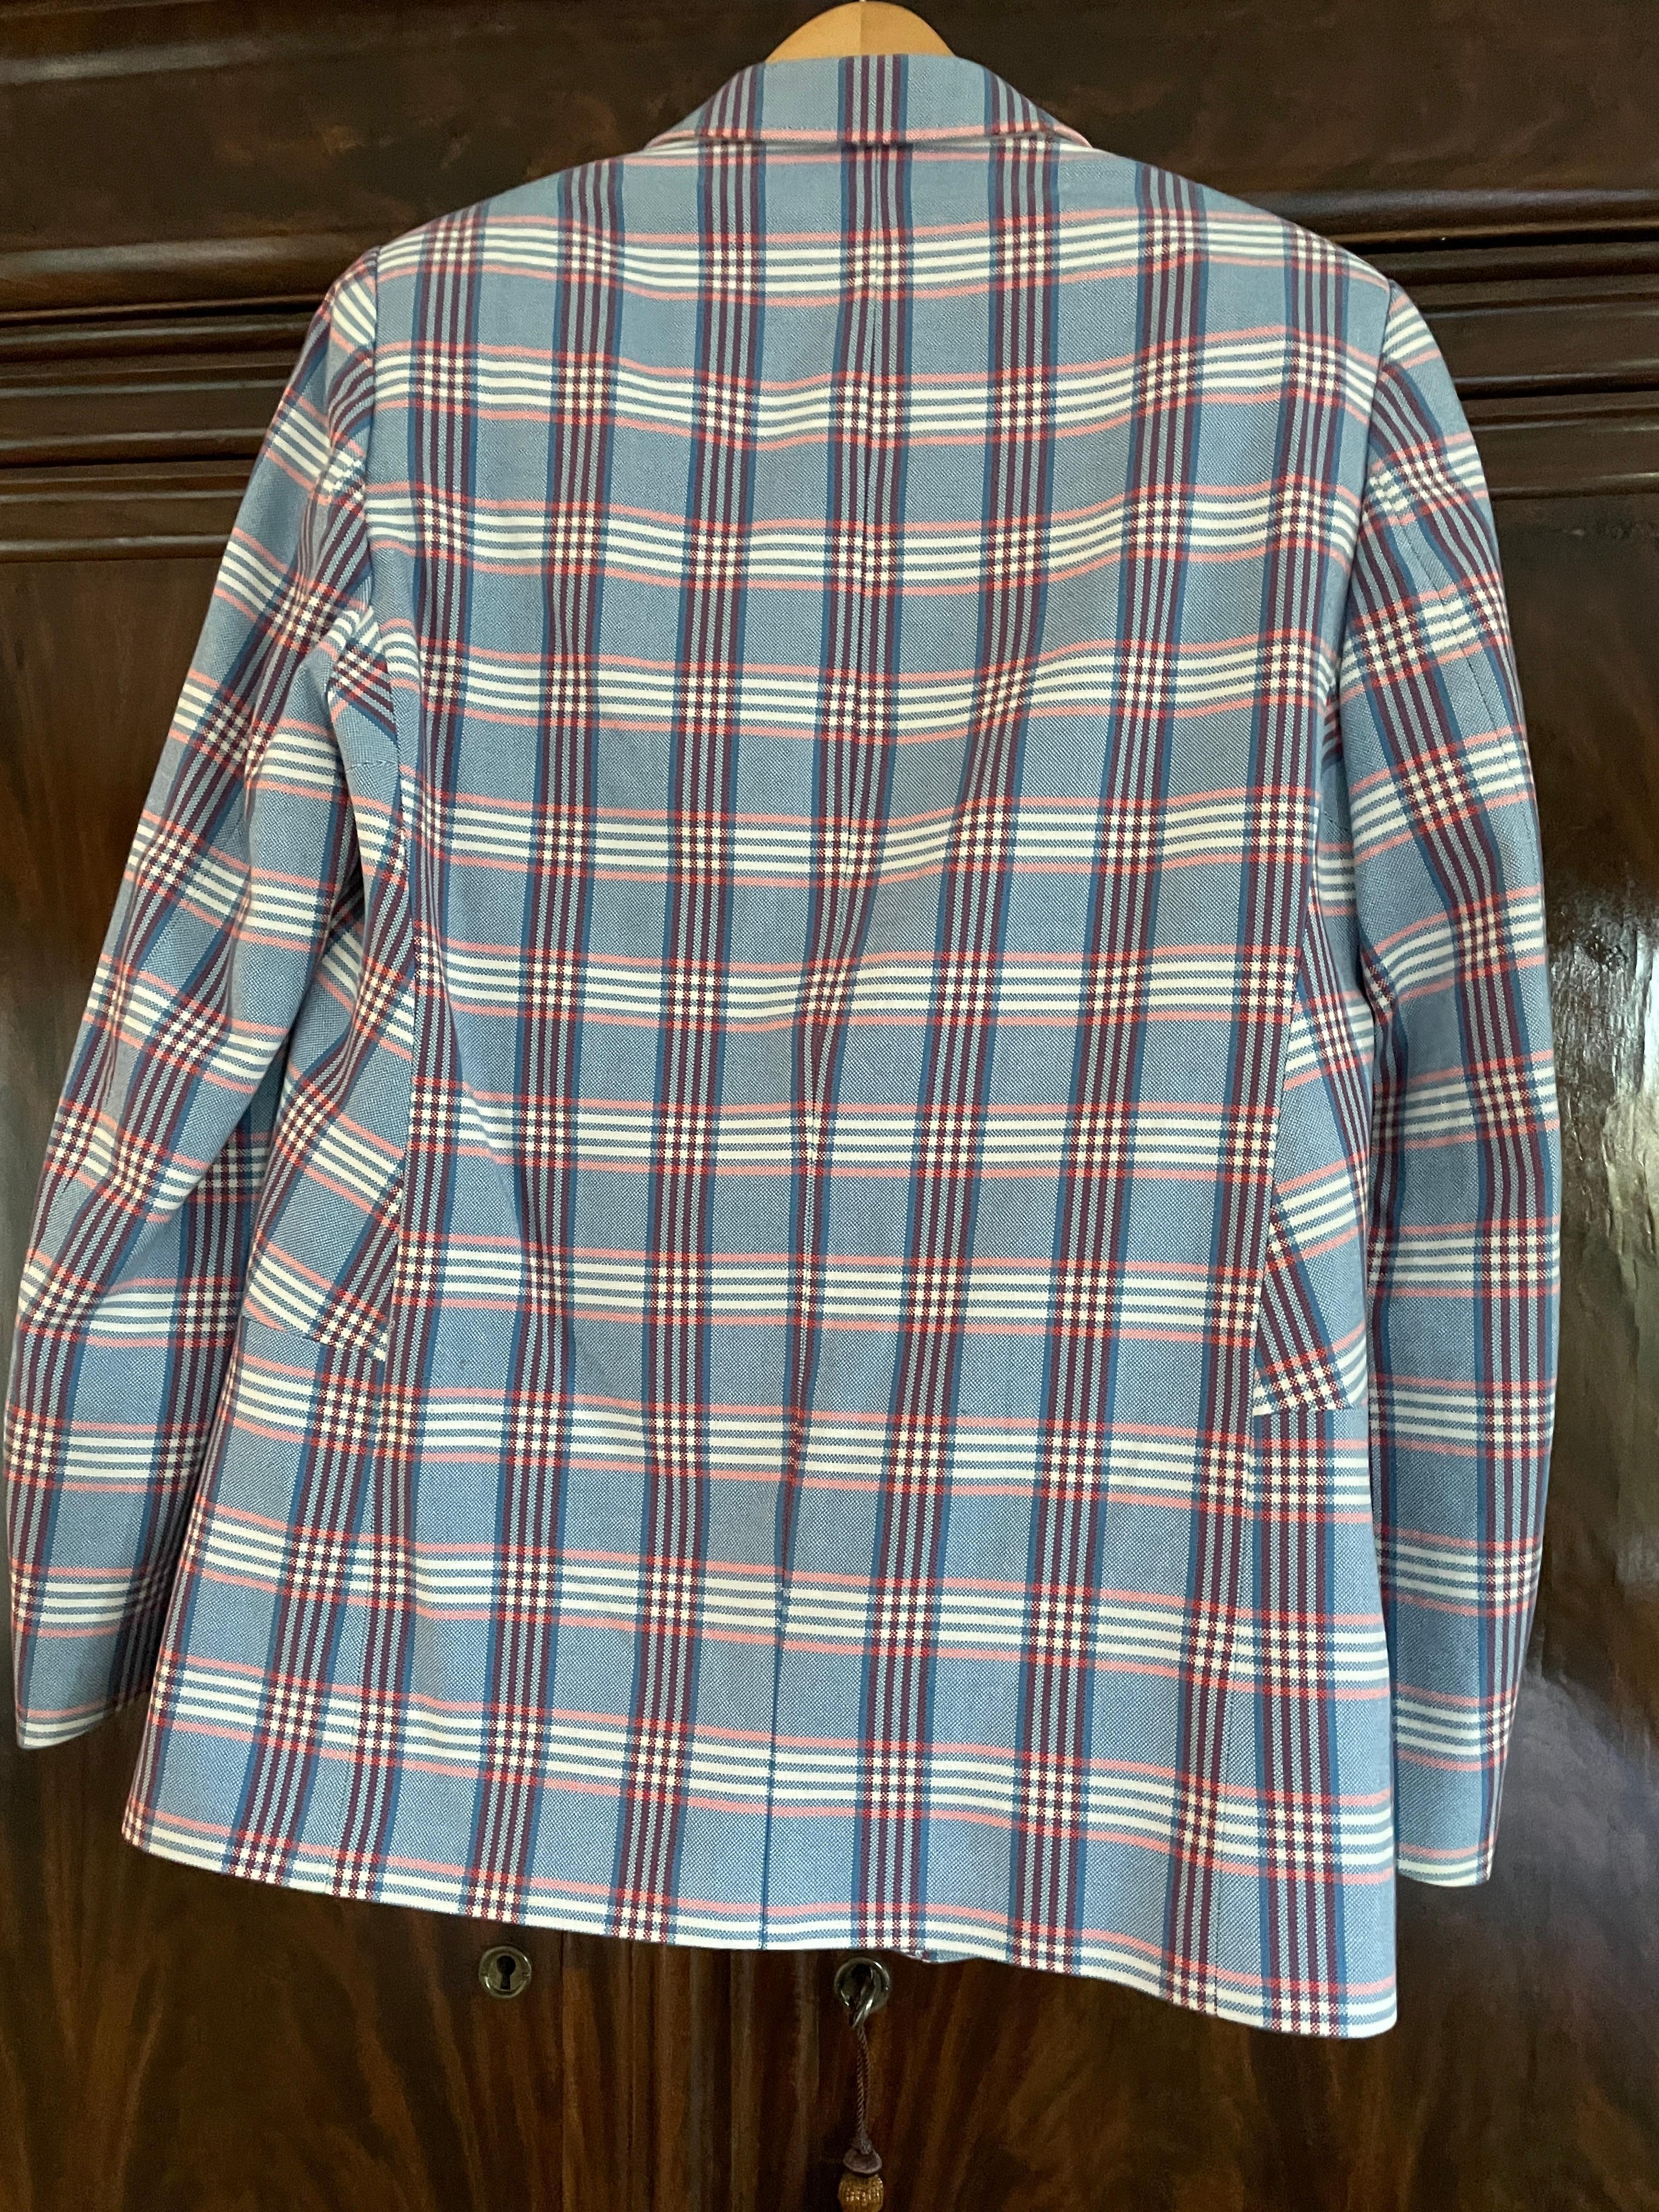 Walter van Beirendonck Men's Plaid Jacket with Umbrella Pattern  In Good Condition For Sale In Cloverdale, CA